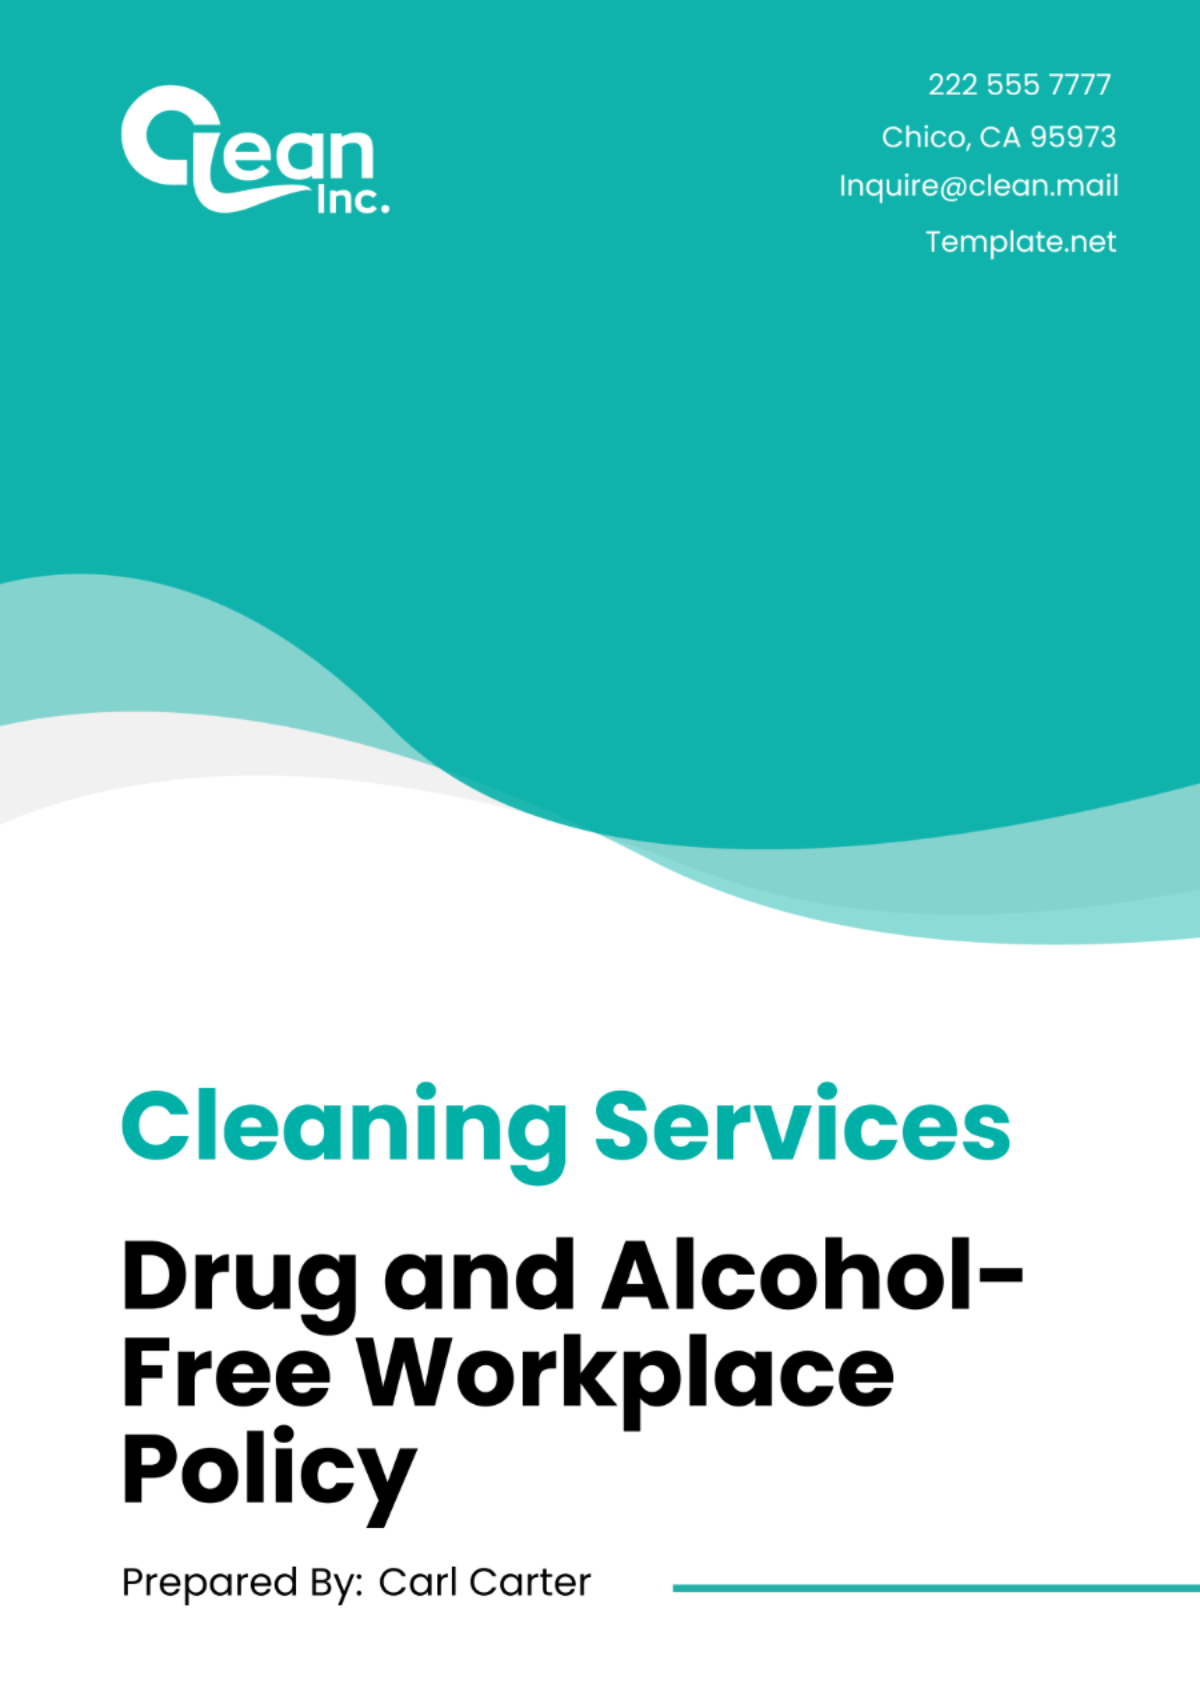 Cleaning Services Drug and Alcohol-Free Workplace Policy Template